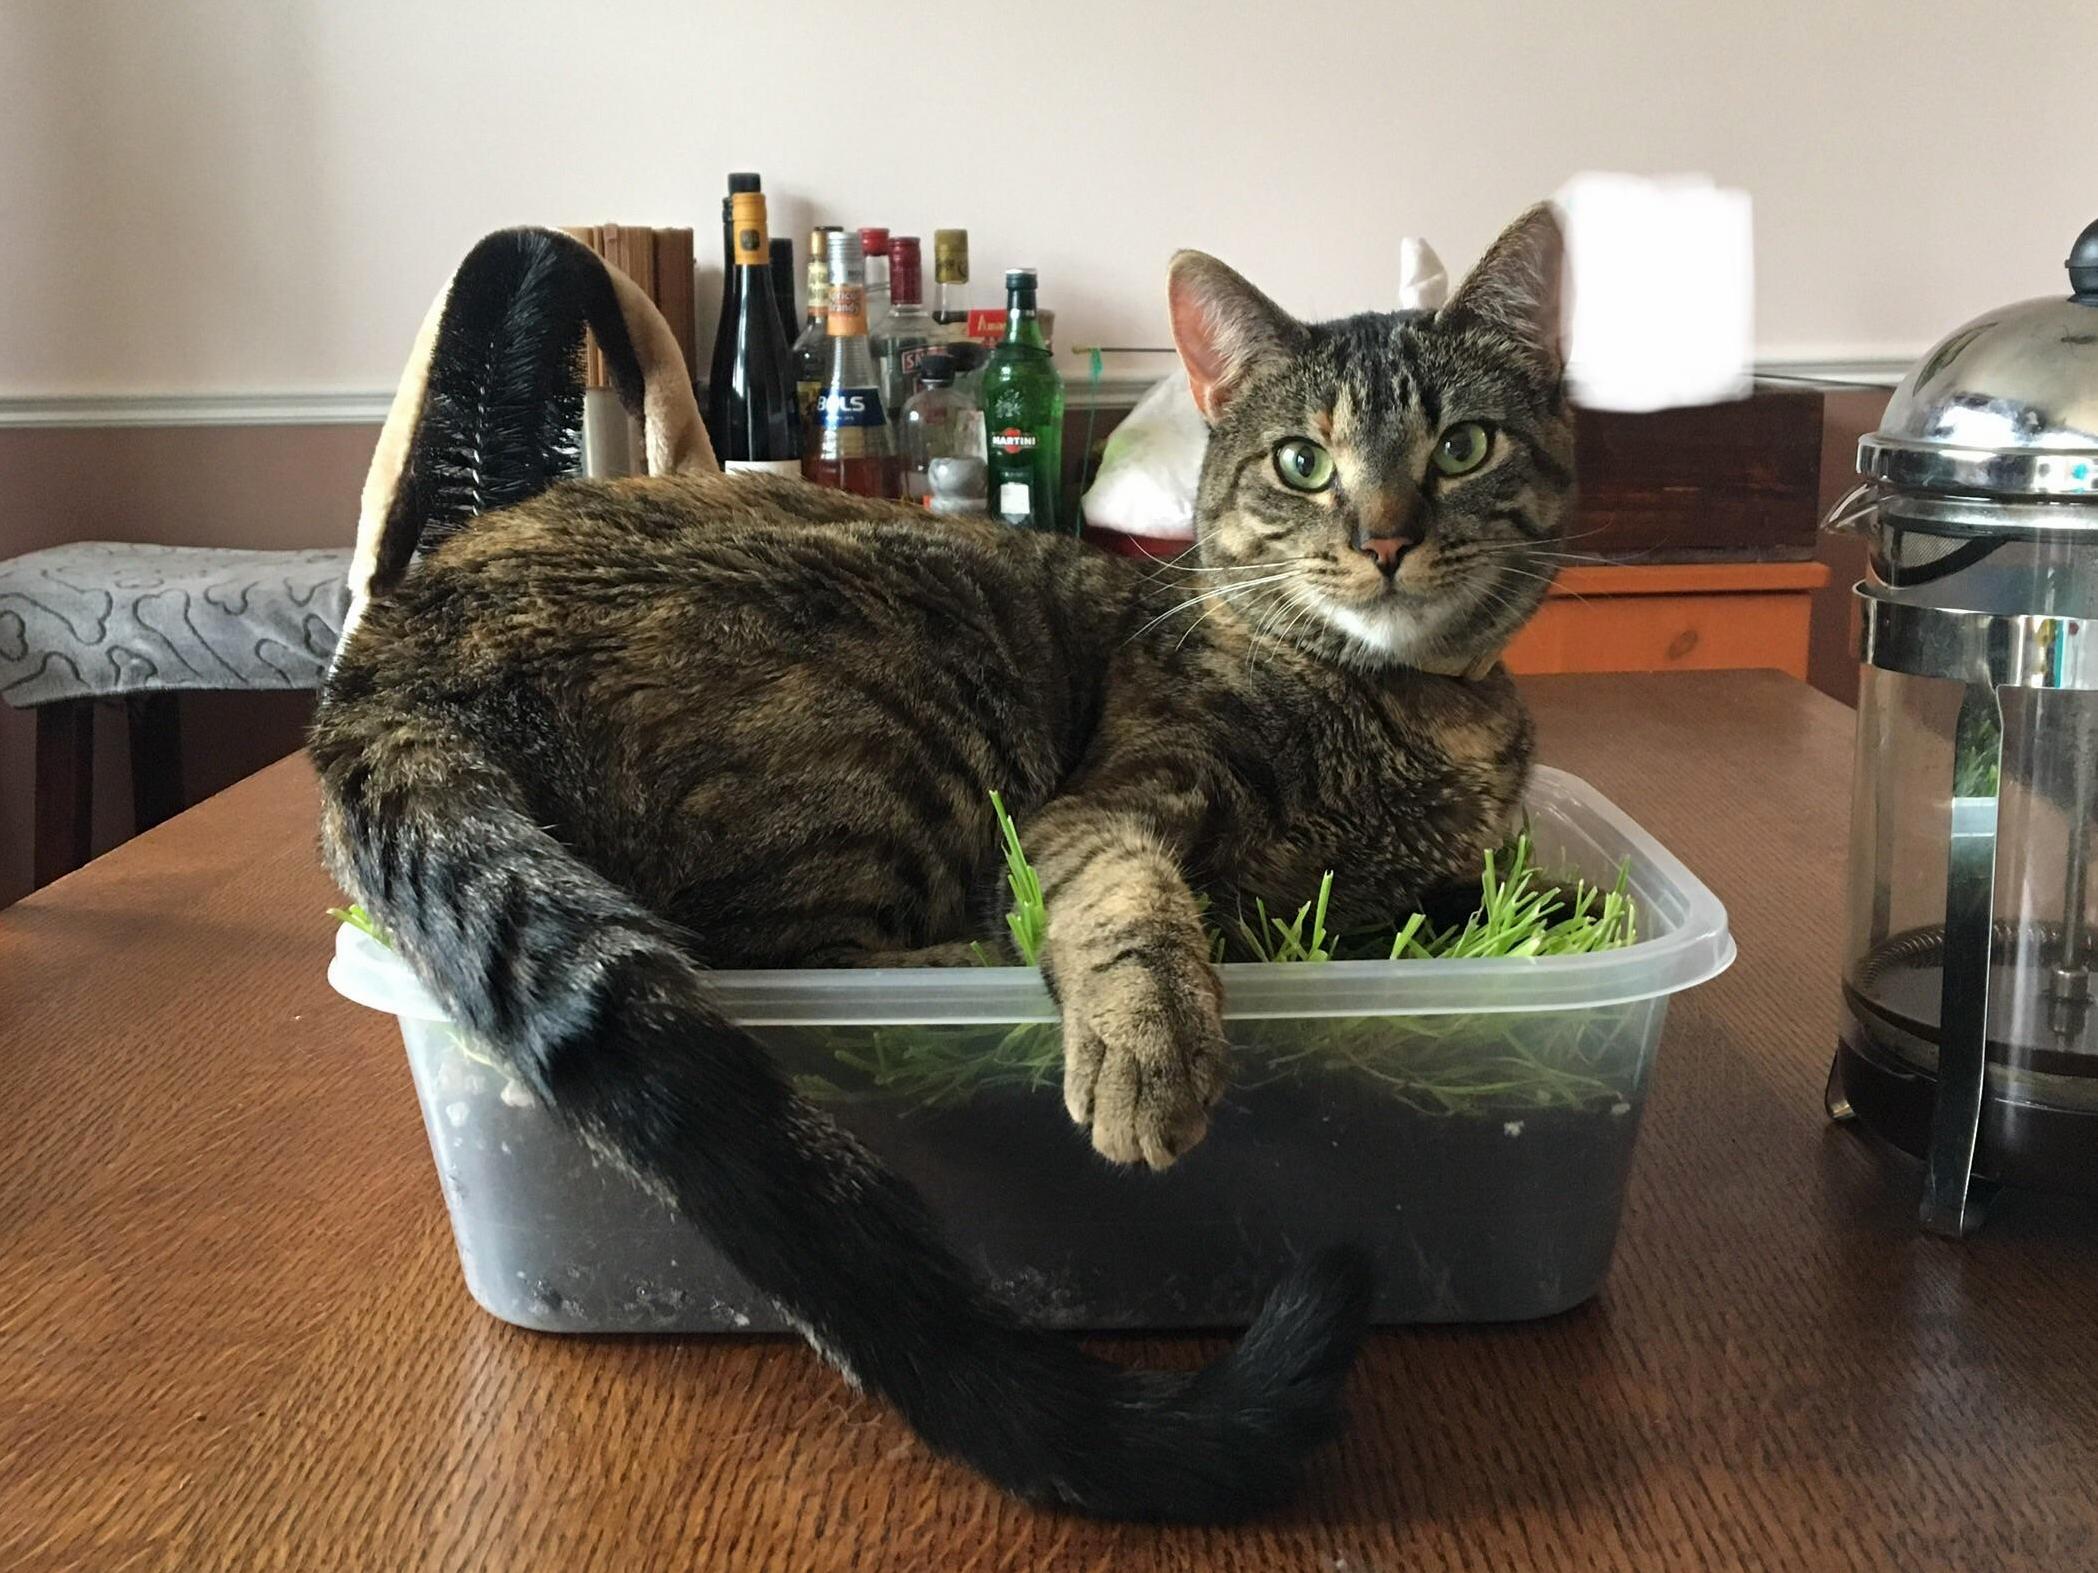 Cass is a wee bit too big for her catgrass bed. time for an upgrade!